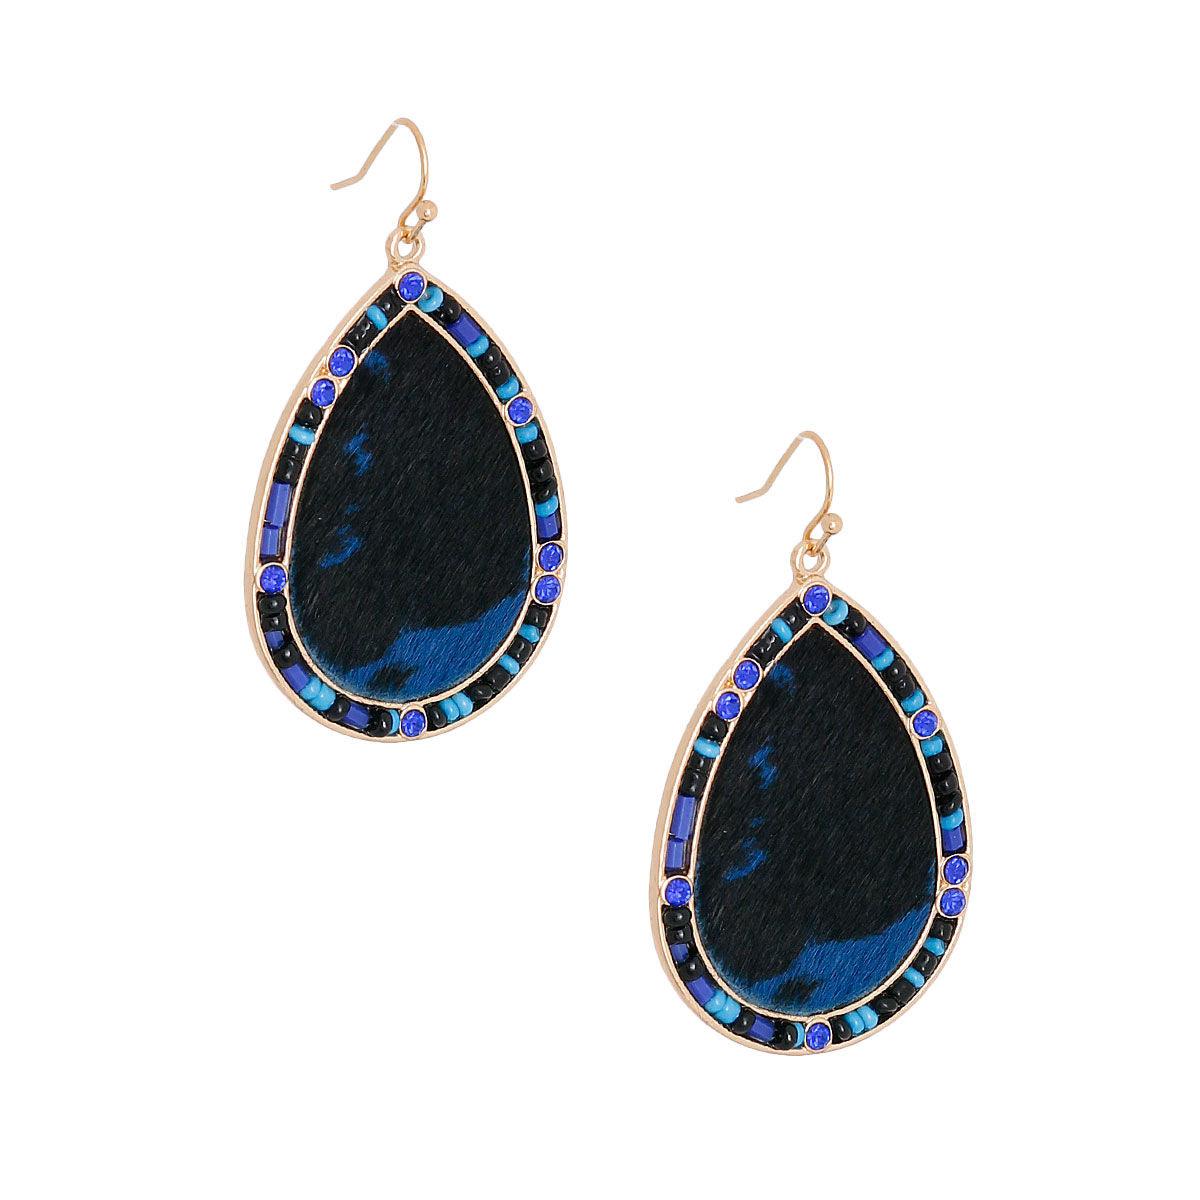 Get Noticed: Blue Teardrop Earrings to Elevate Your Style